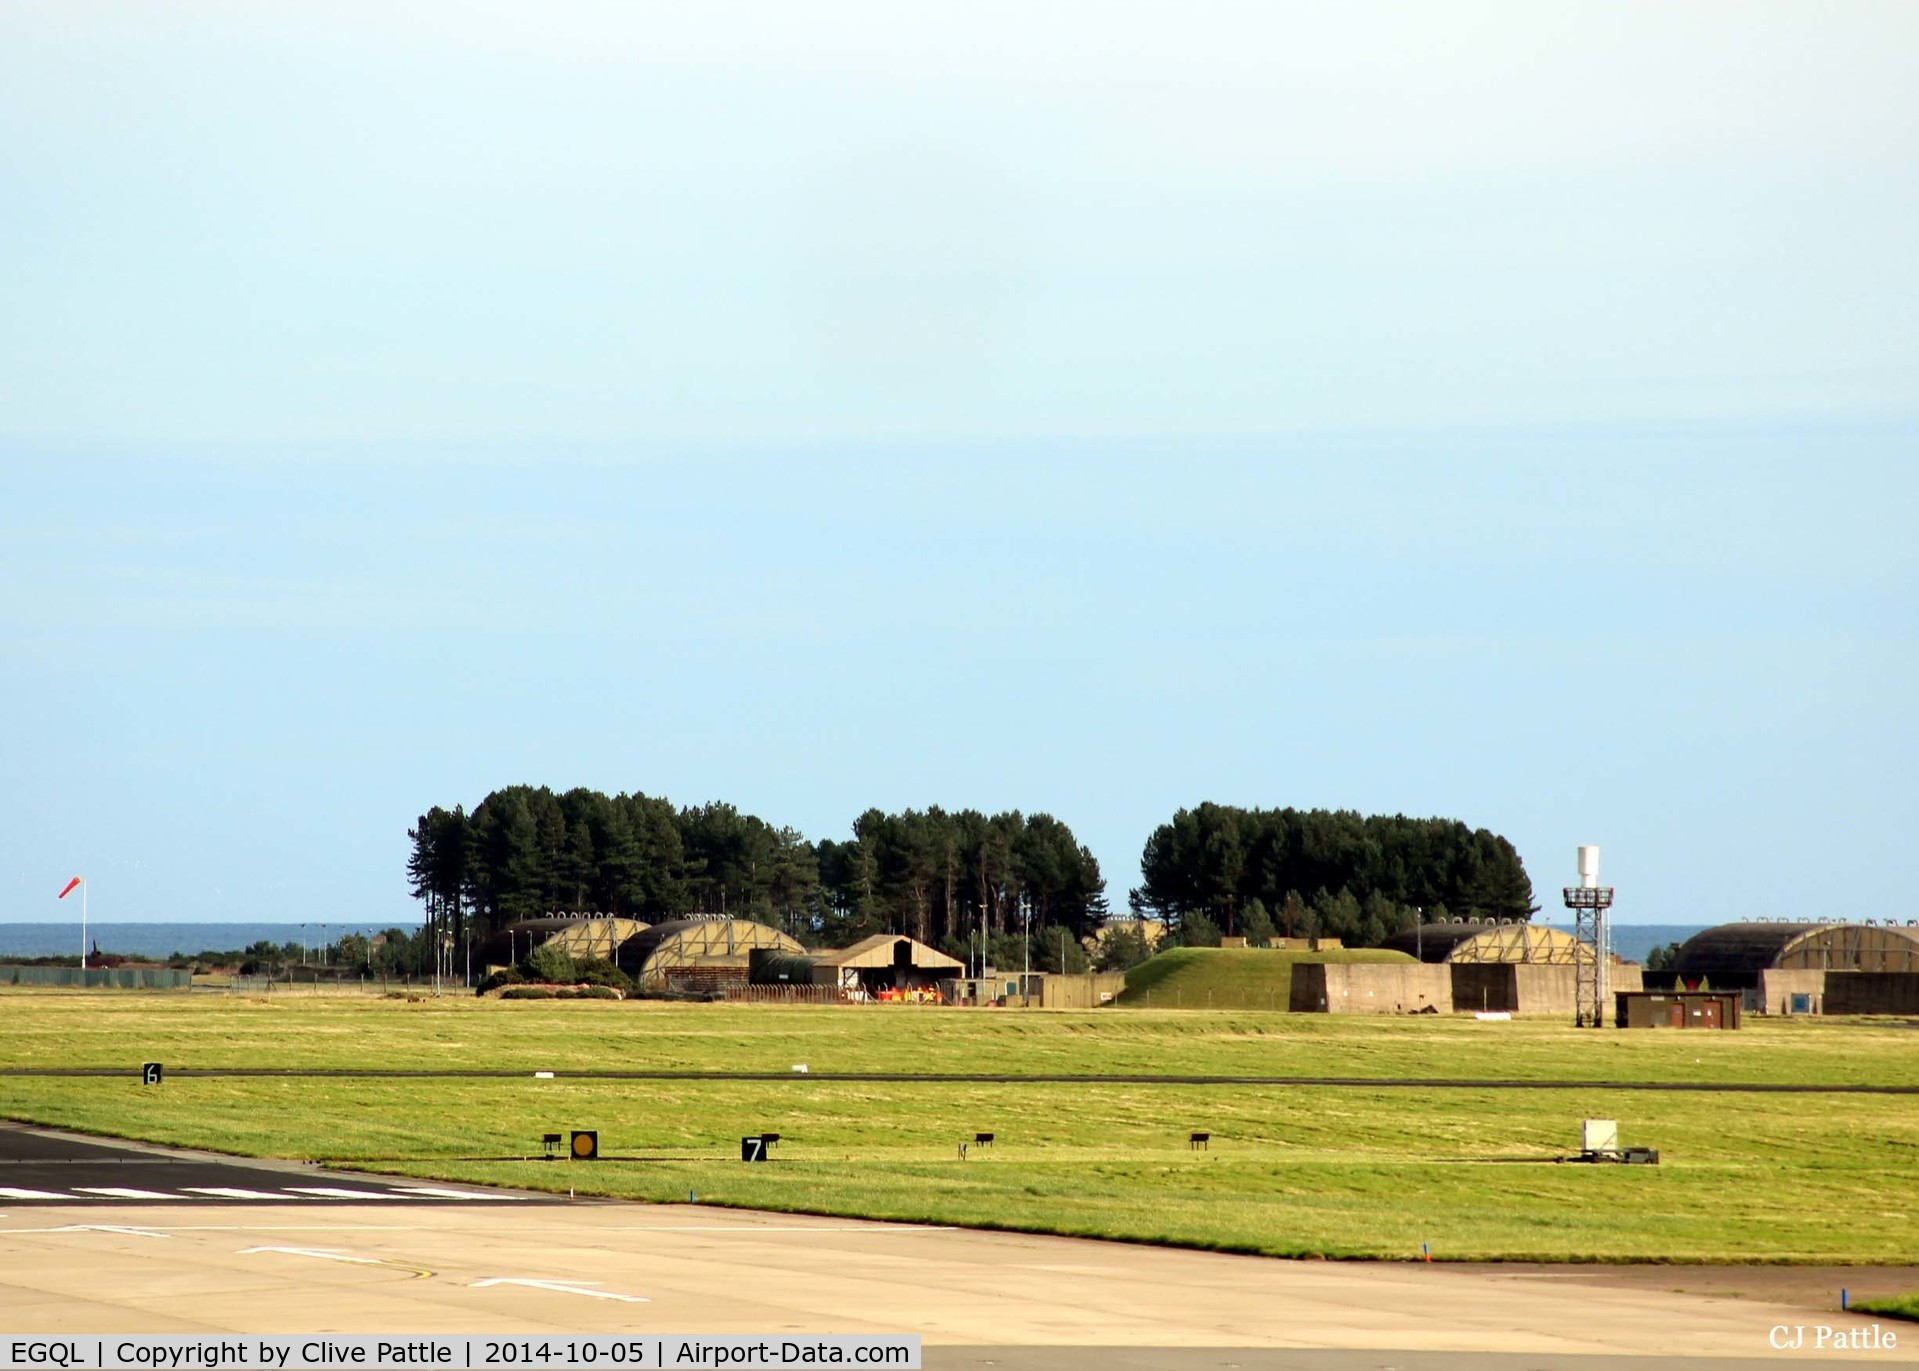 RAF Leuchars Airport, Leuchars, Scotland United Kingdom (EGQL) - A view from the hump towards the soon-to-be-closed historical airfield at RAF Leuchars. At the time of the photograph all the resident fast jet squadrons Nos 1 and 6, with their BAe Typhoons, have already vacated their HAS's and moved to RAF Lossiemouth. 